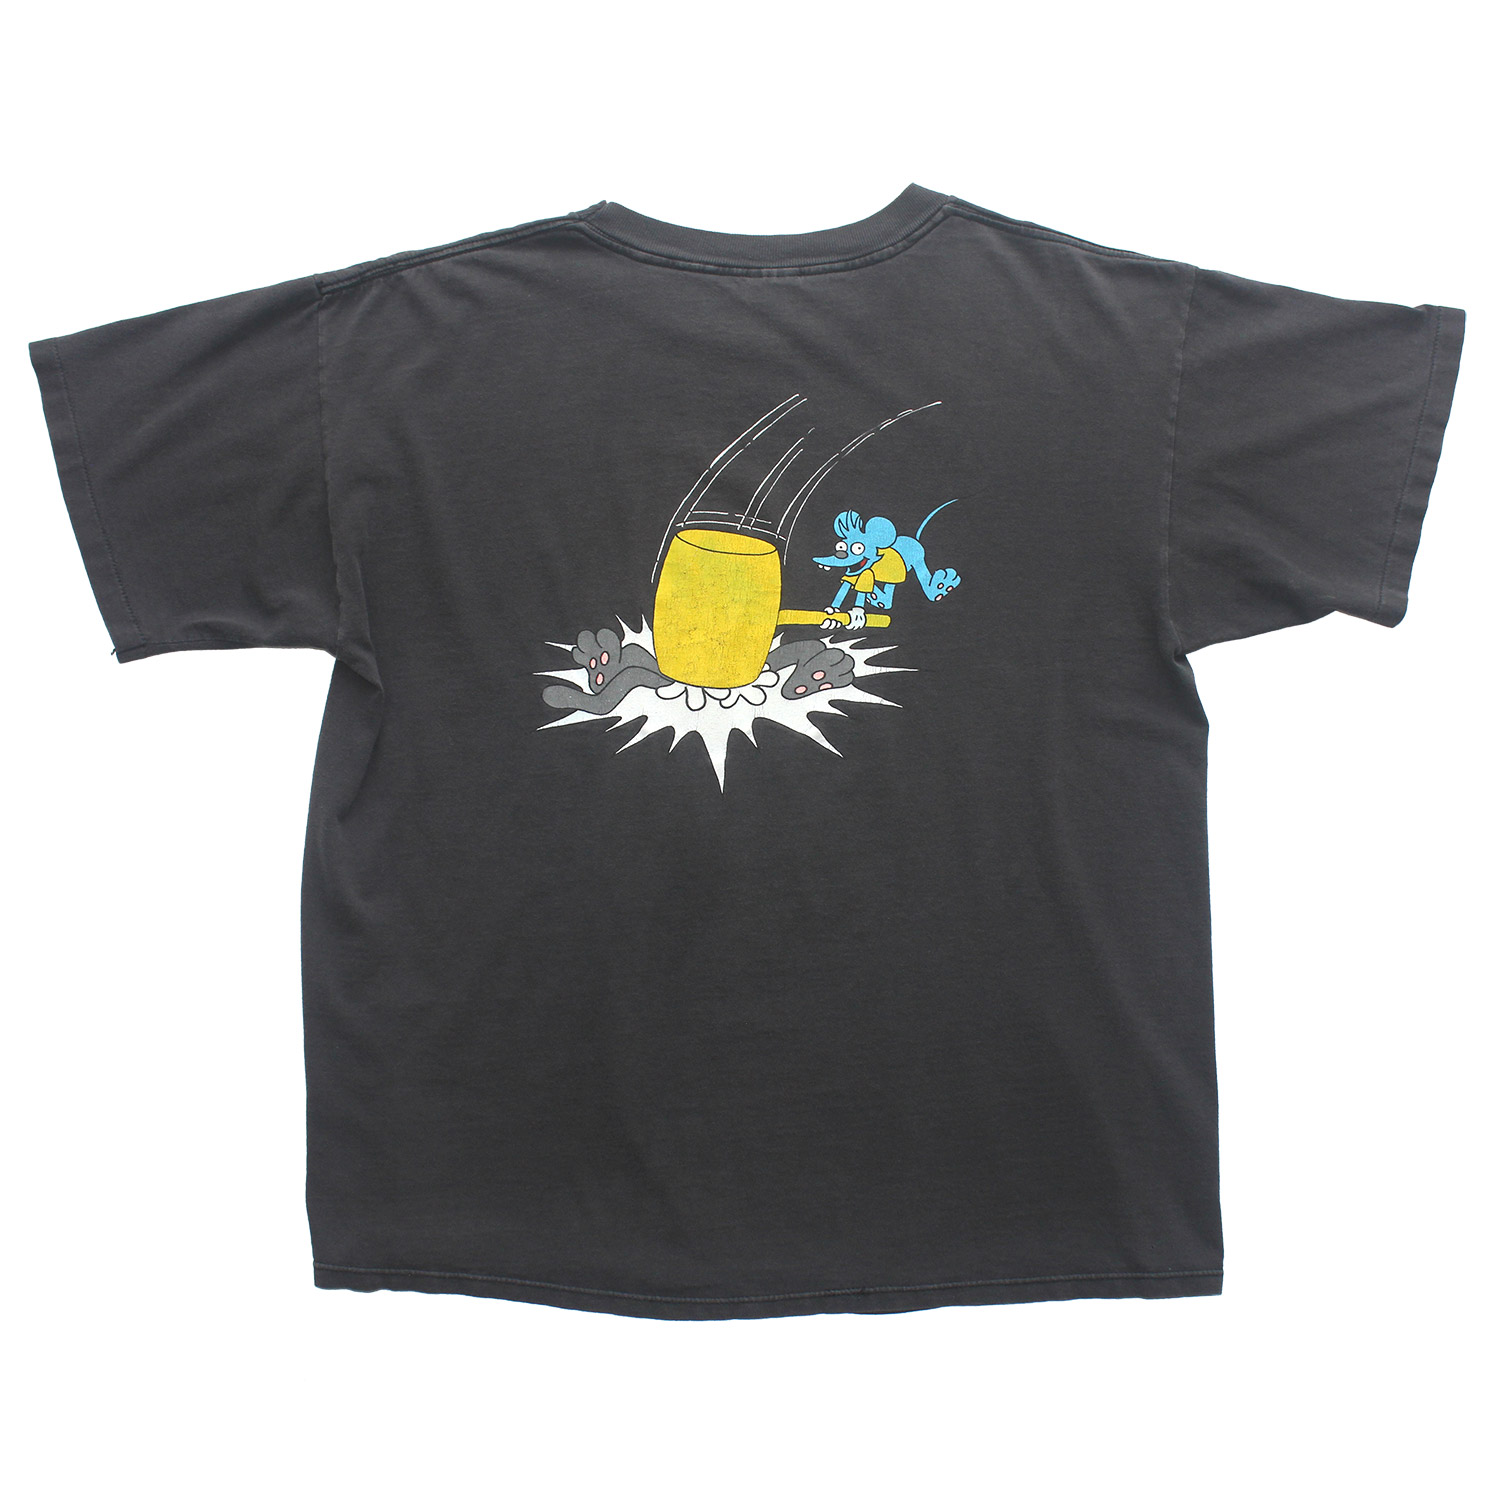 Vintage The Itchy & Scratchy Show T-shirt, Back